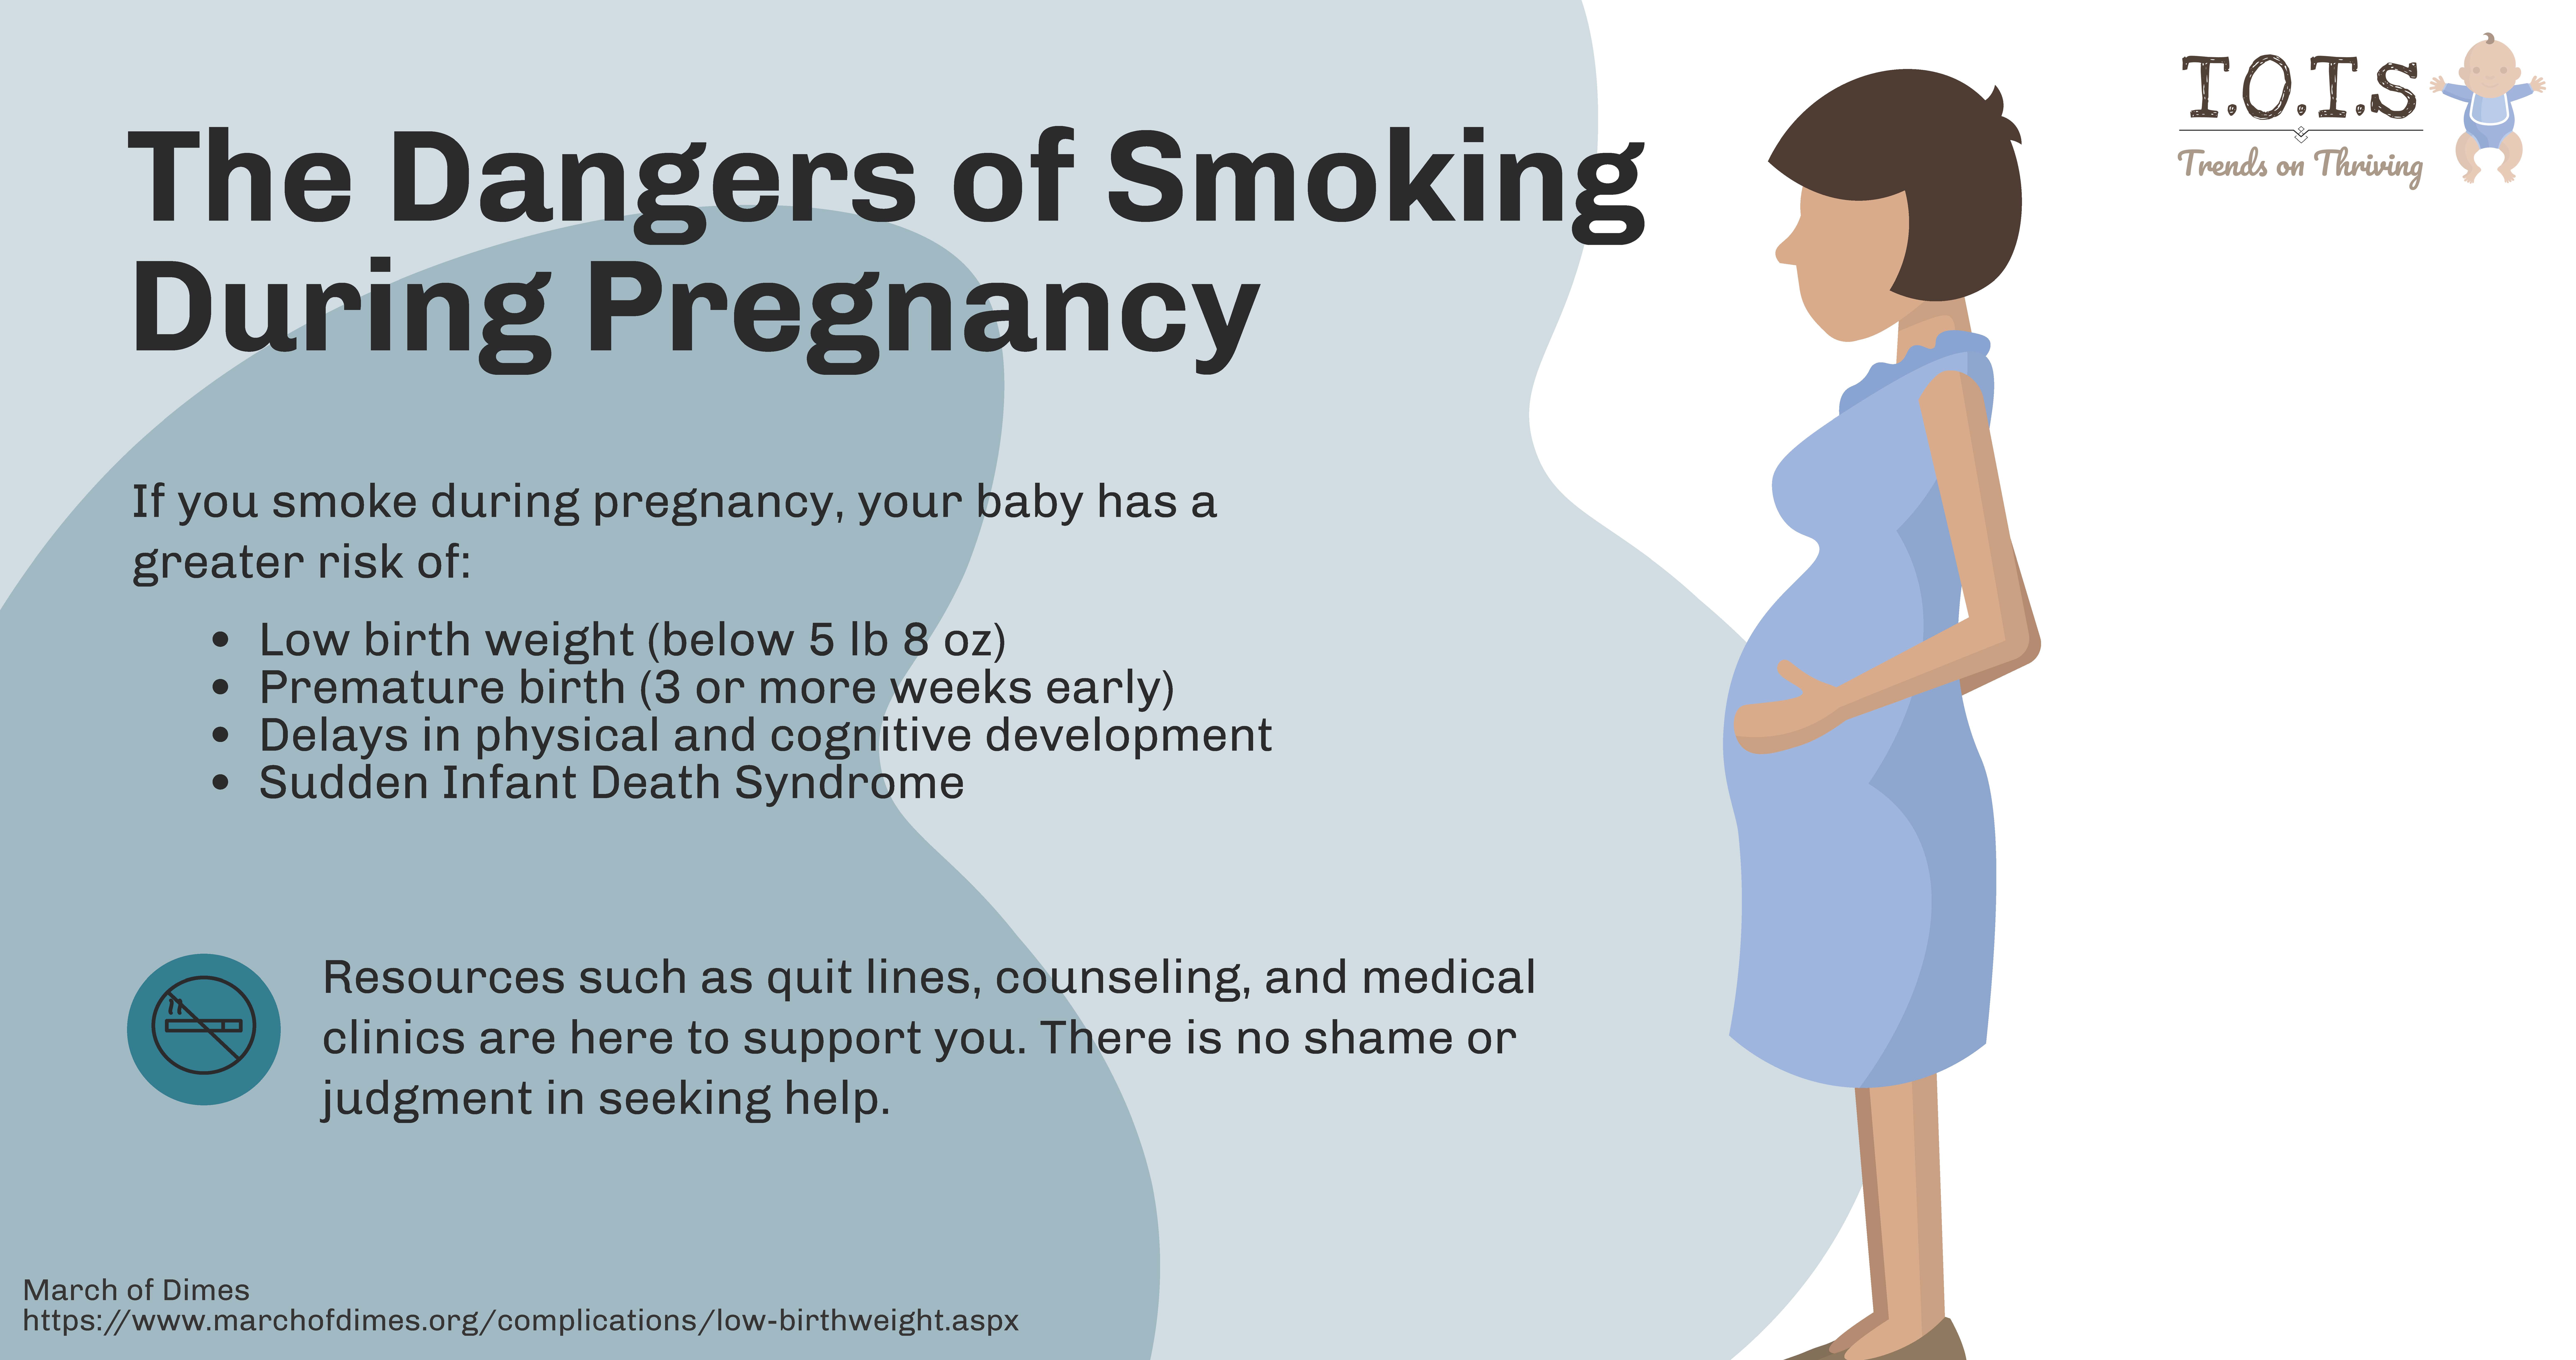 The Dangers of Smoking During Pregnancy